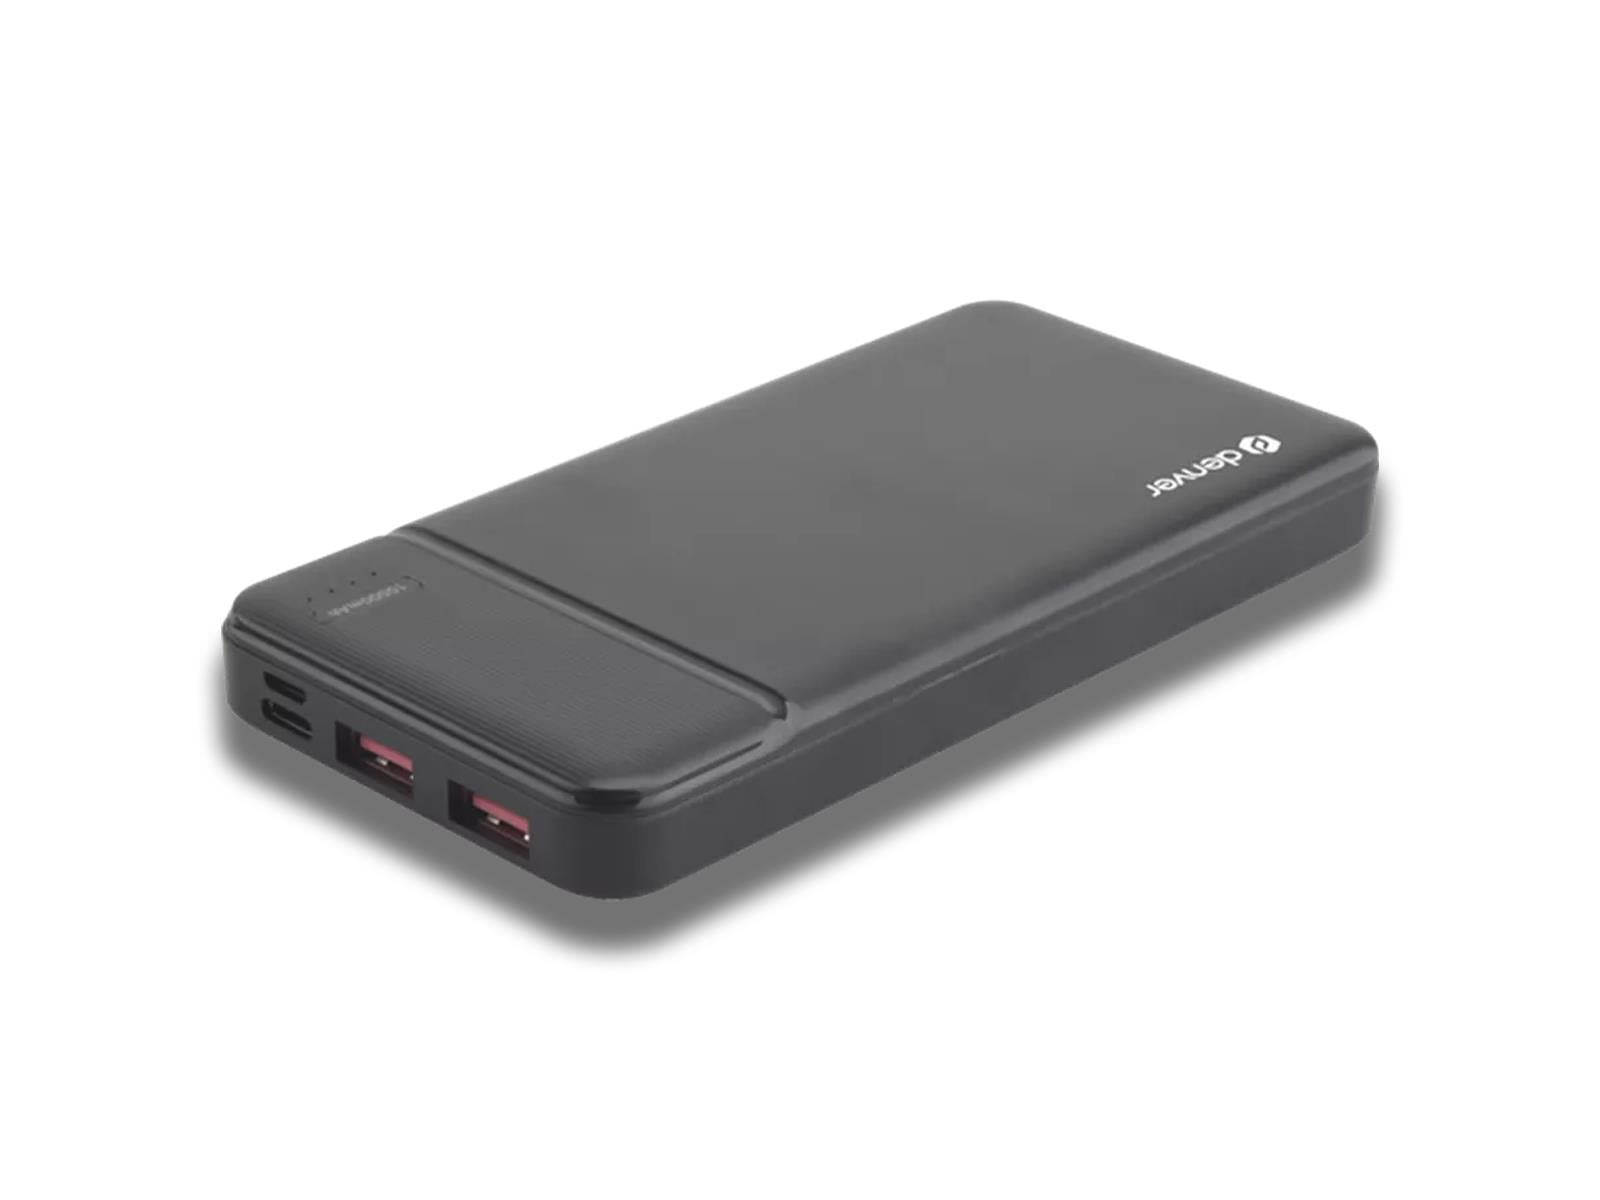 Image shows an angled view of the 10,000mAh Denver High Capacity Portable Charger